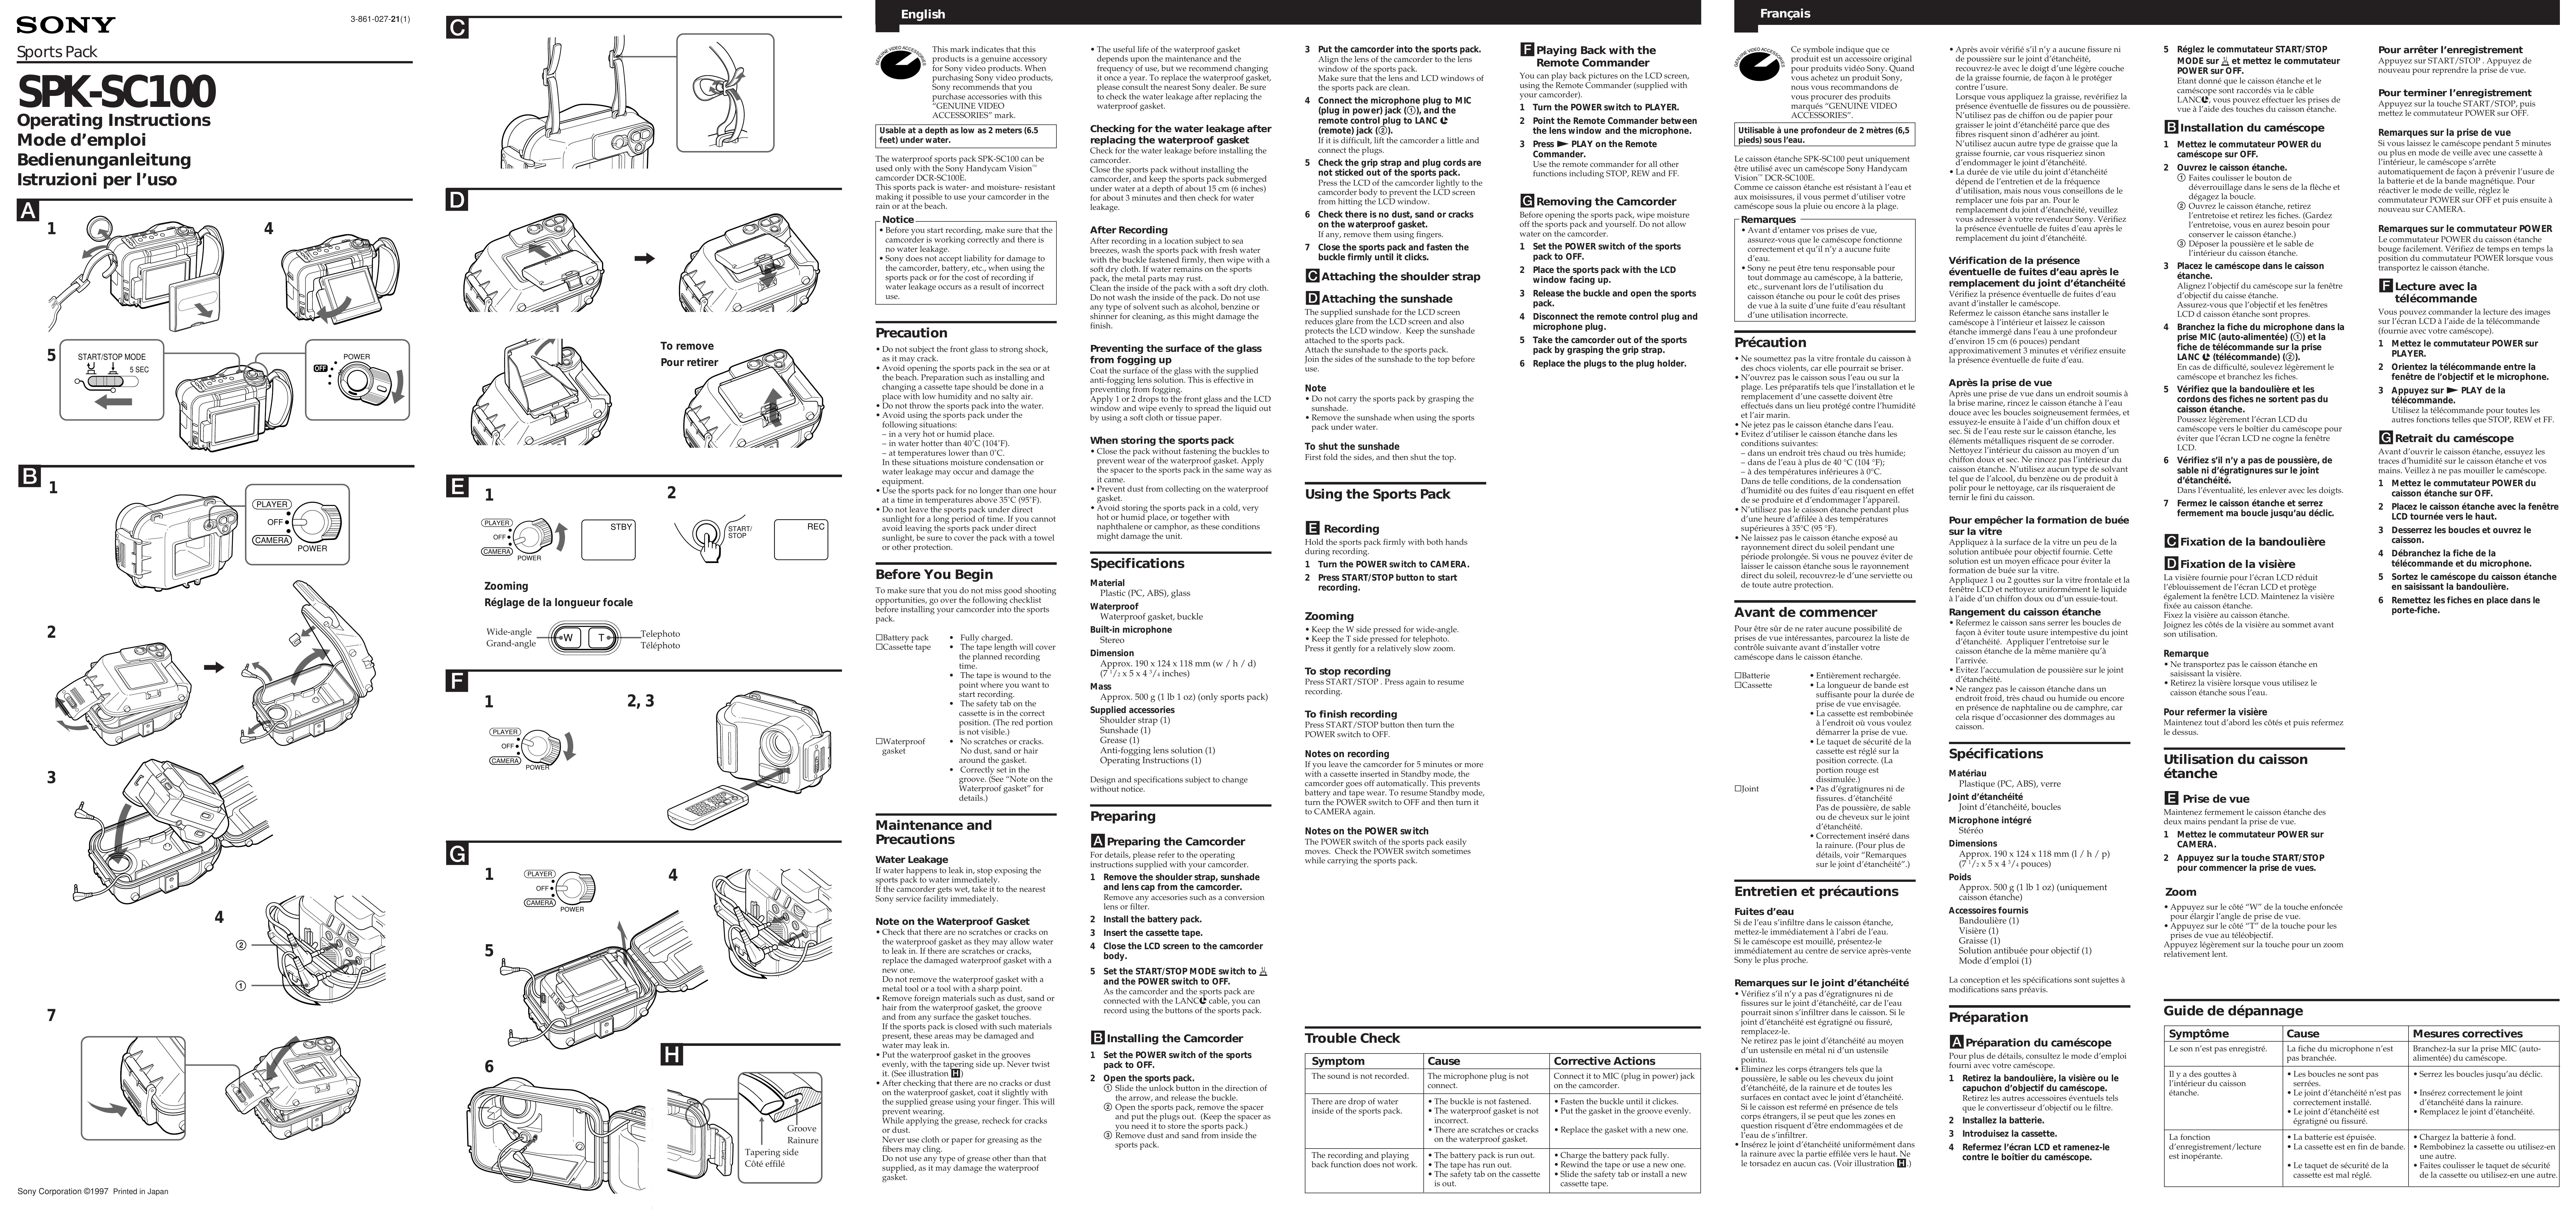 Sony SPK-SC100 Camcorder Accessories User Manual